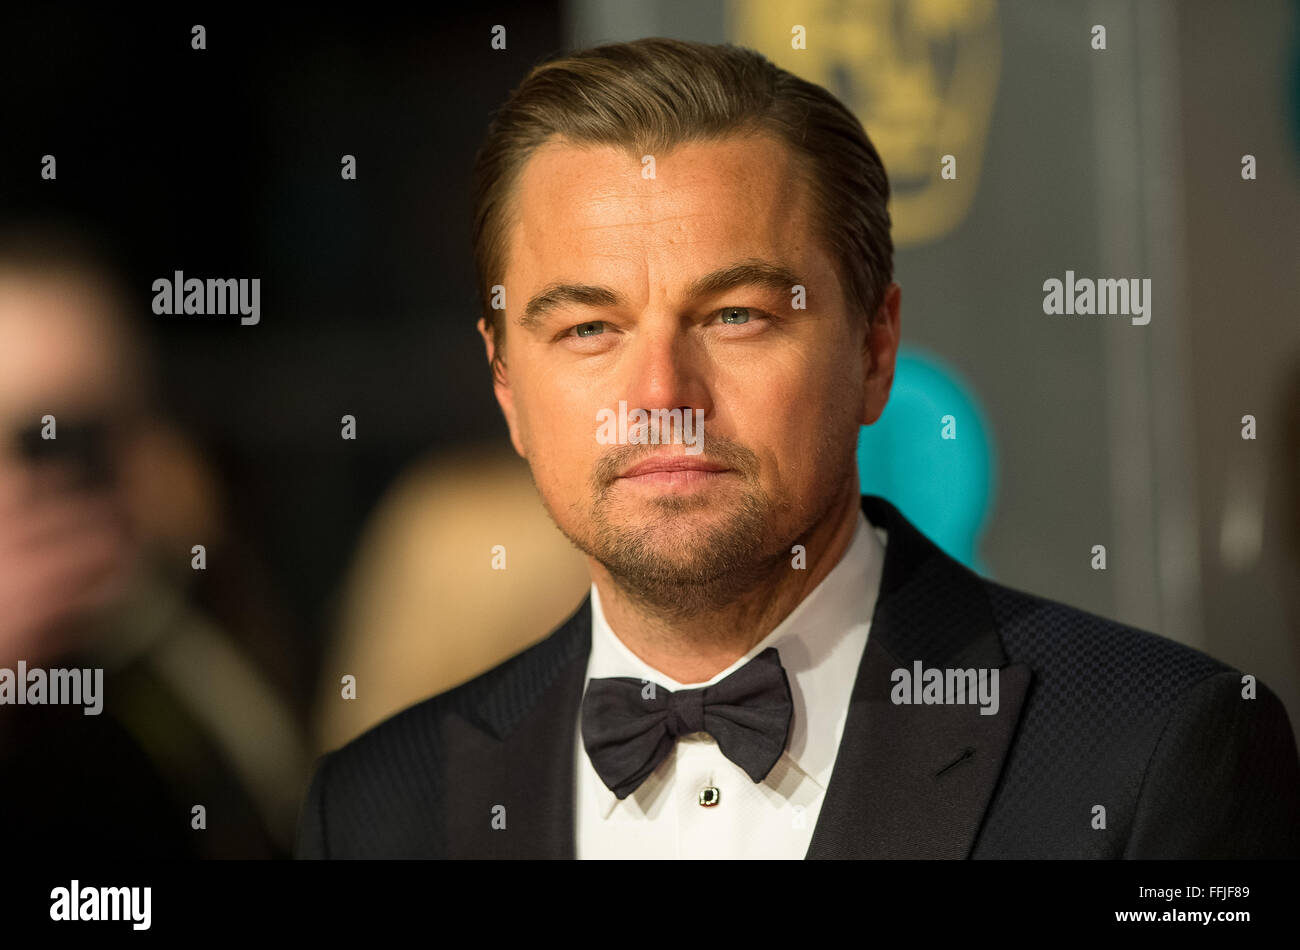 London, UK. 14th February, 2016. Actor Leonardo DiCaprio arrives at the EE British Academy Film Awards, BAFTA Awards, at the Royal Opera House in London, England, on 14 February 2016. Credit:  dpa picture alliance/Alamy Live News Stock Photo